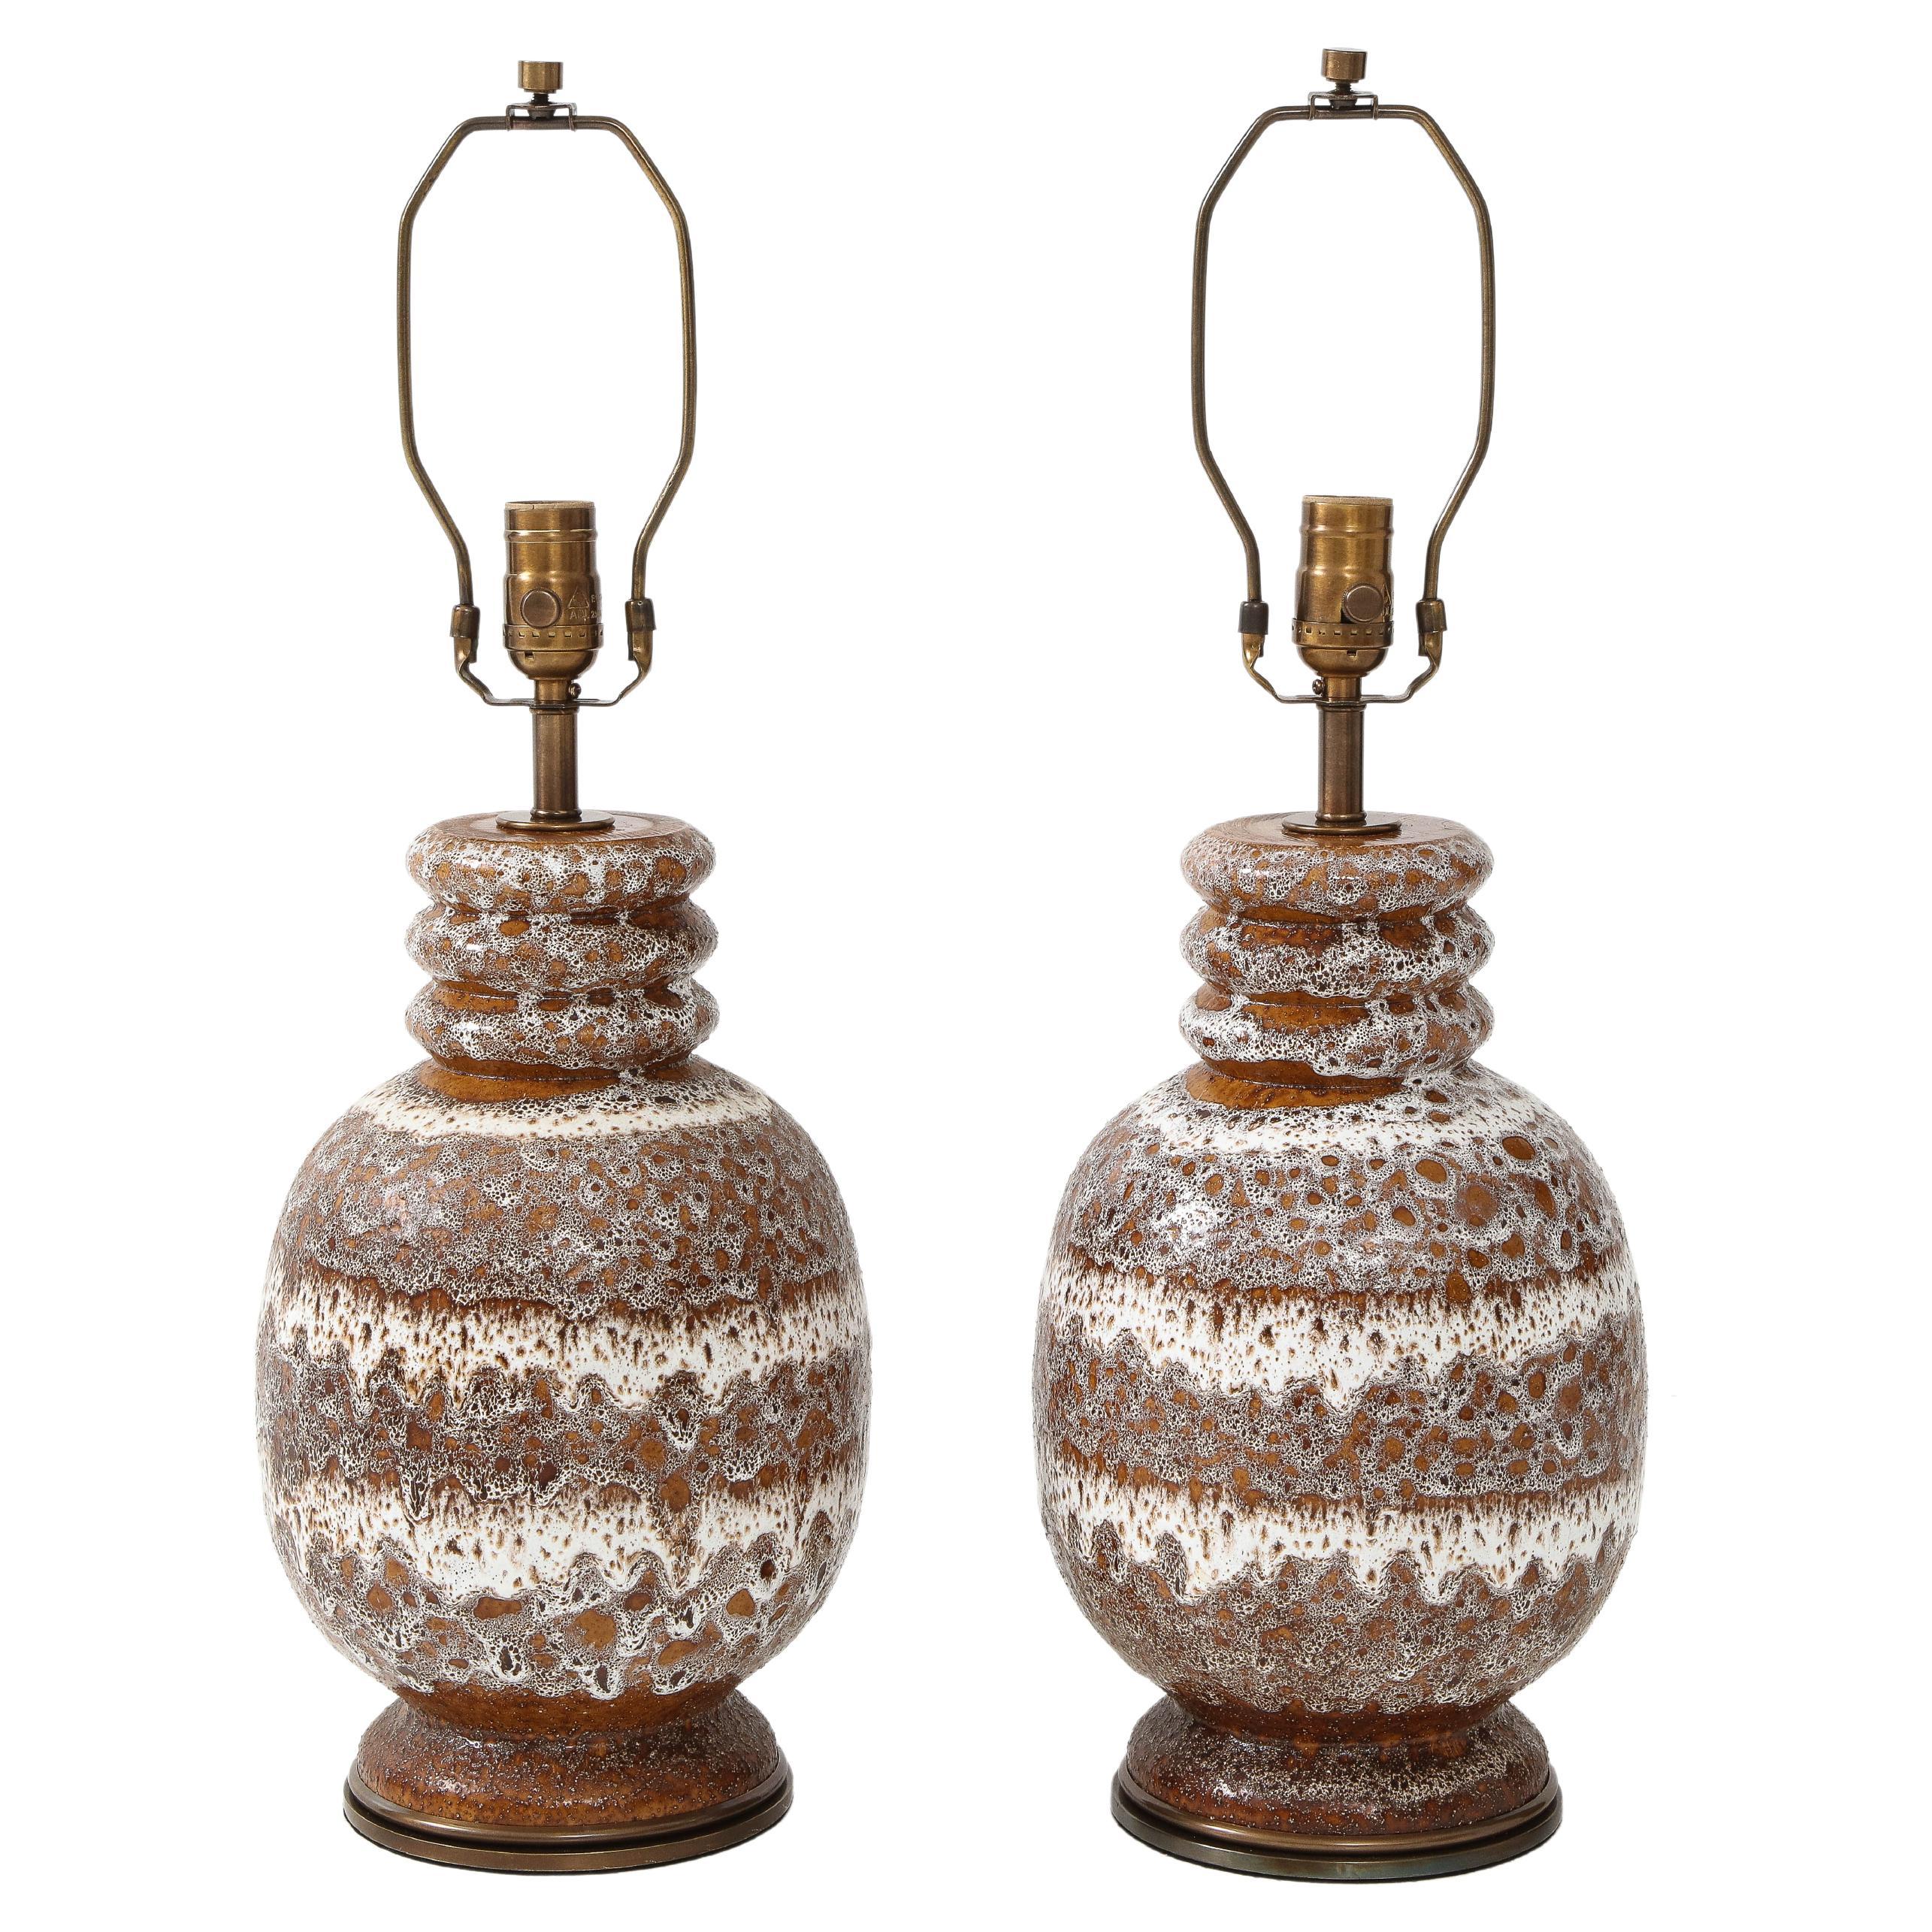 West German Froth Glazed Ceramic Lamps